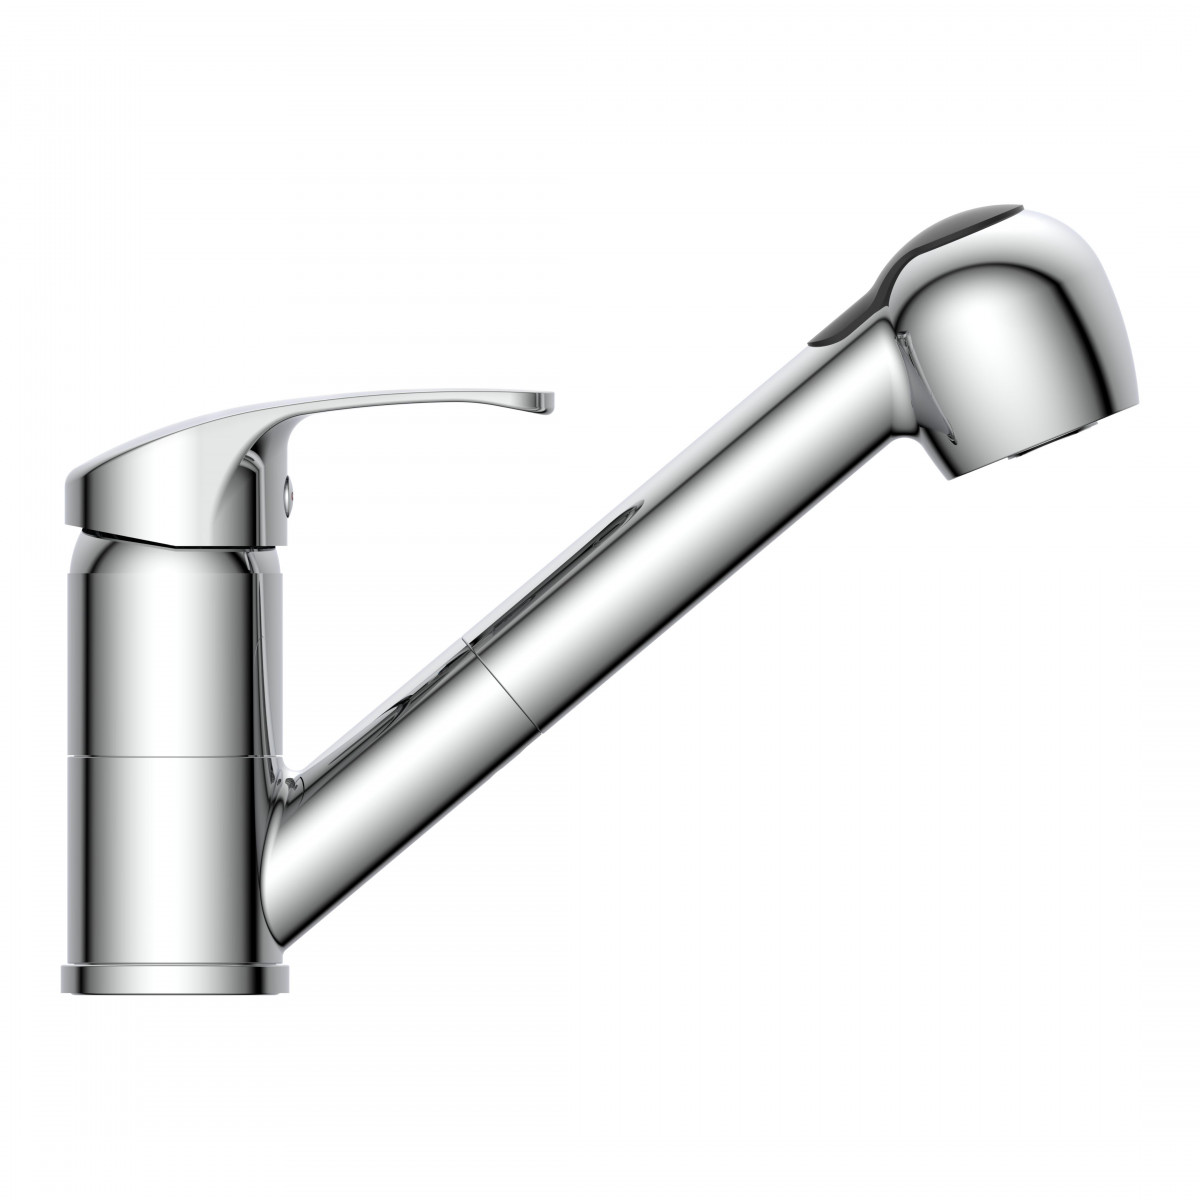 DIZIANI Sink mixer low pressure, chrome, with pull-out sprayer